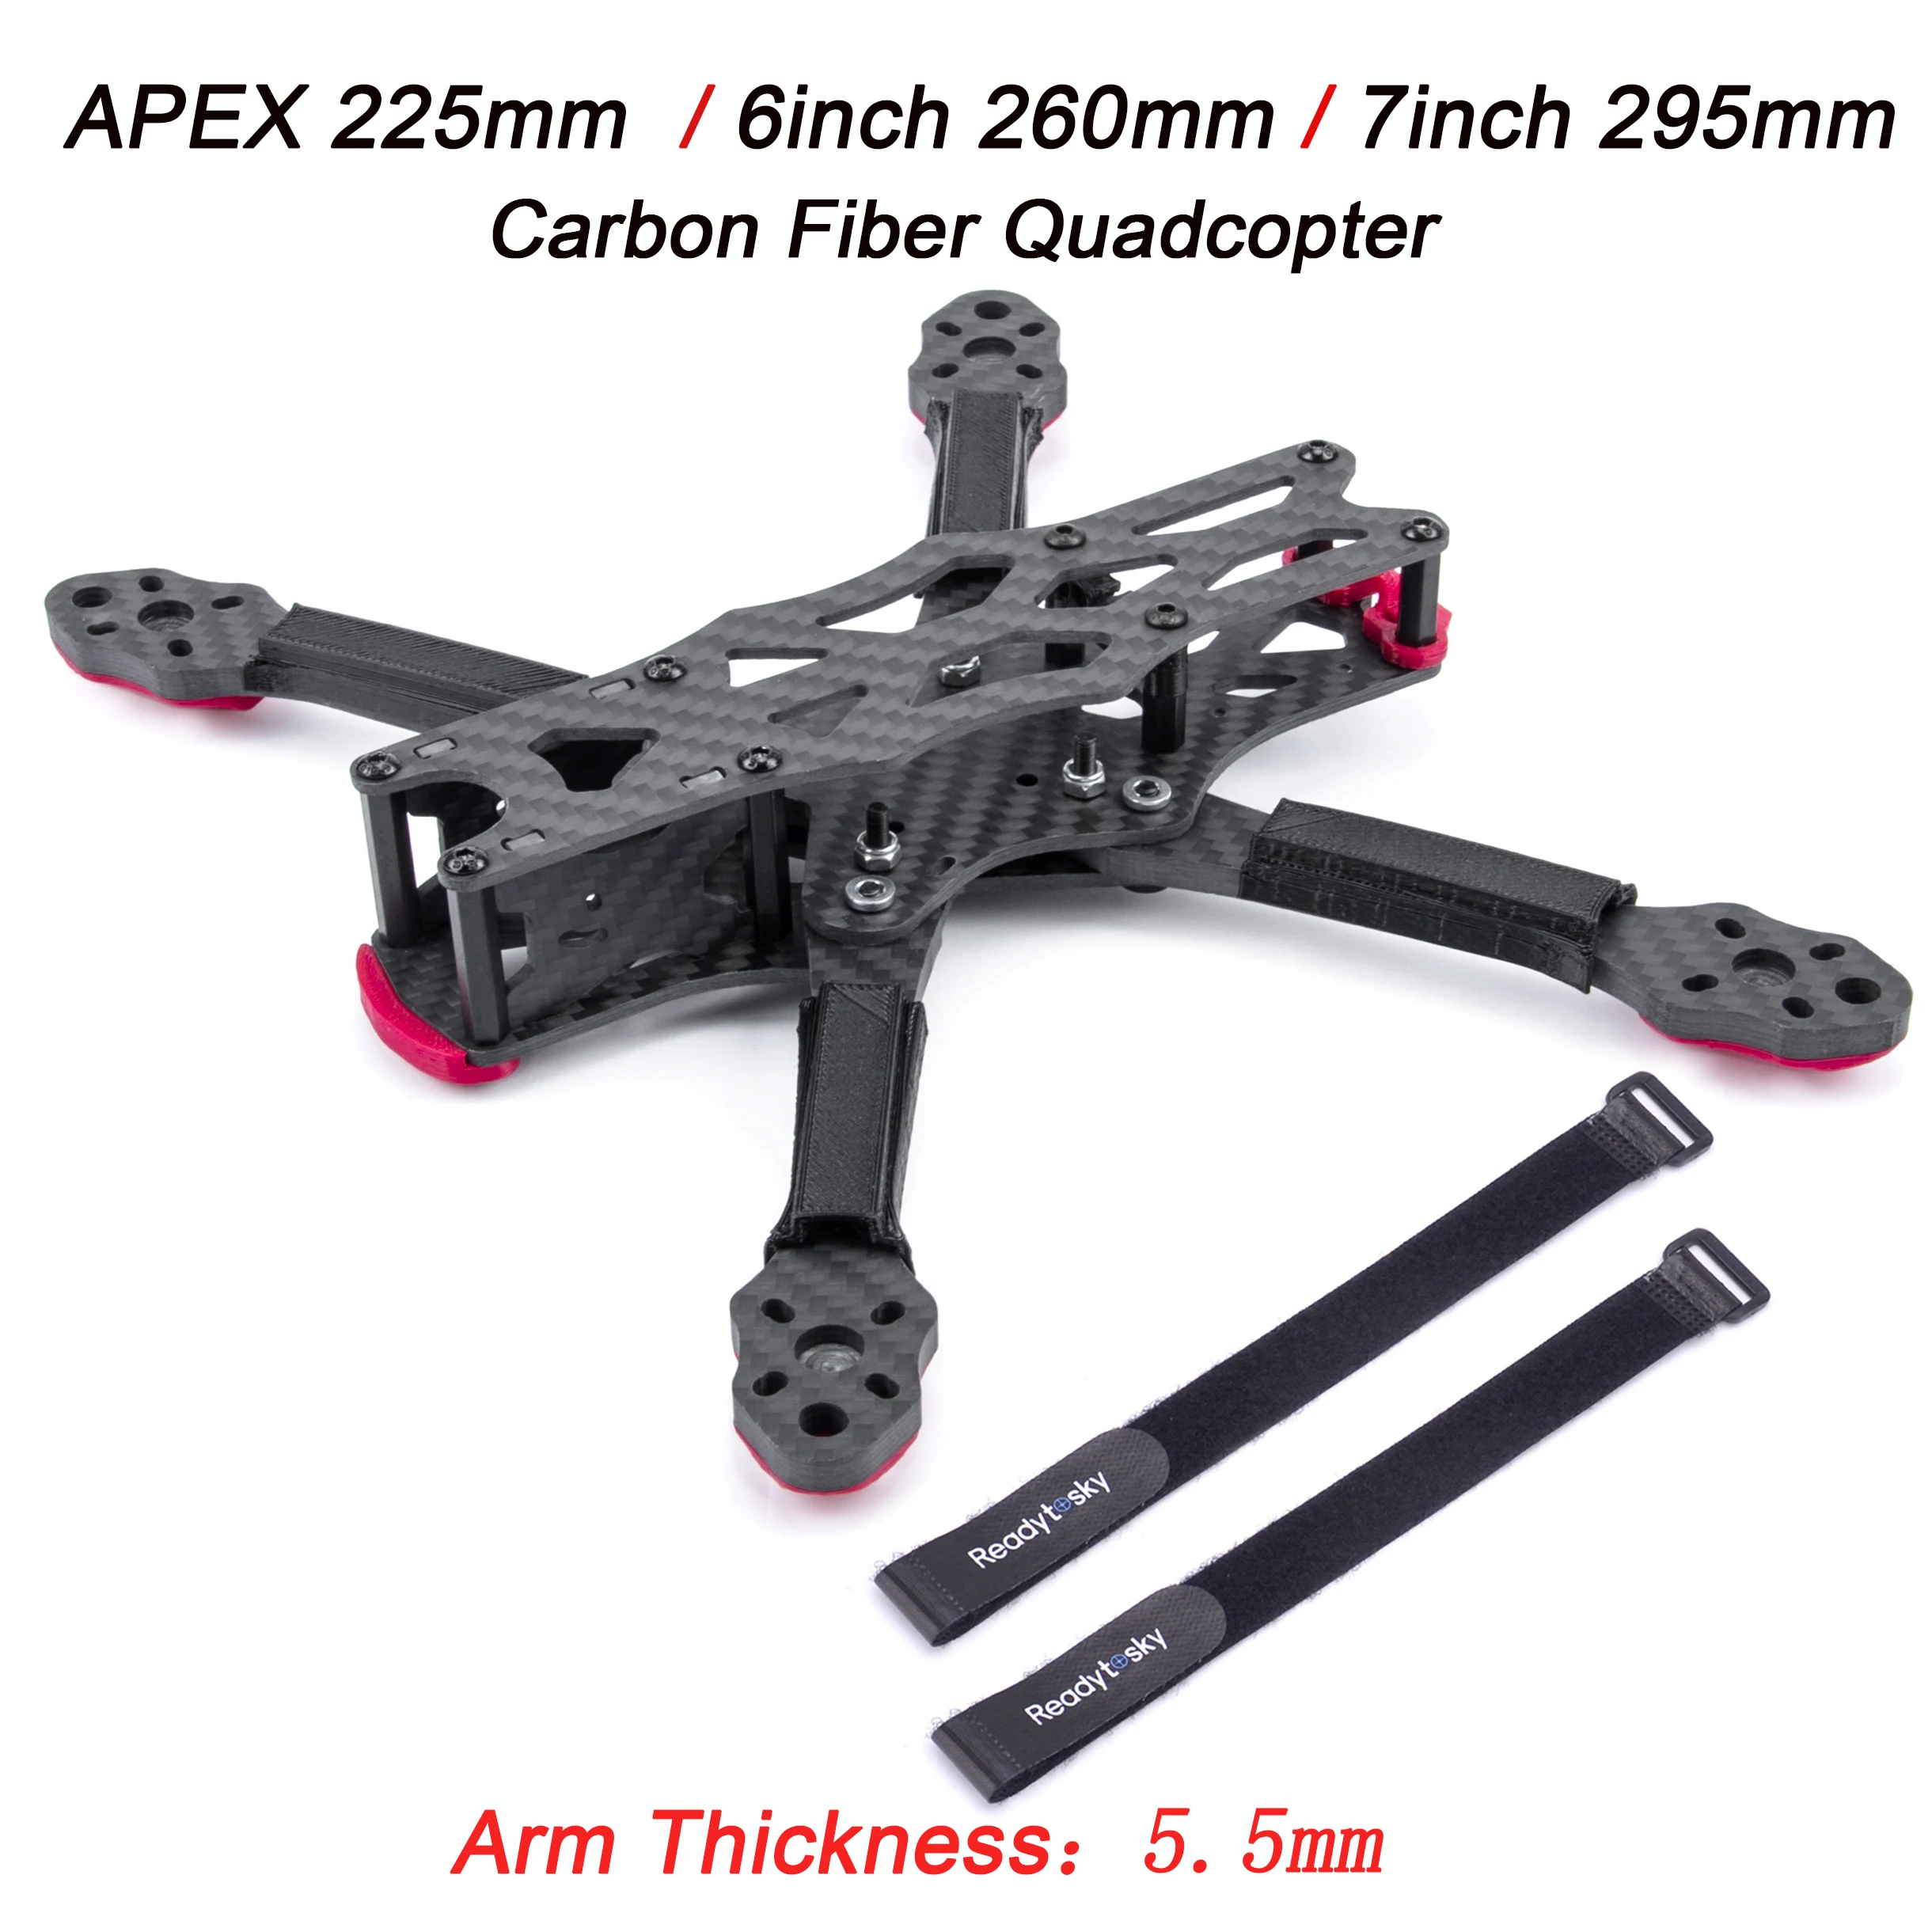 YoungRC 7inch 295mm Carbon Fiber Quadcopter Frame 5.5mm Arm Kit for FPV Freestyle RC Racing Drone